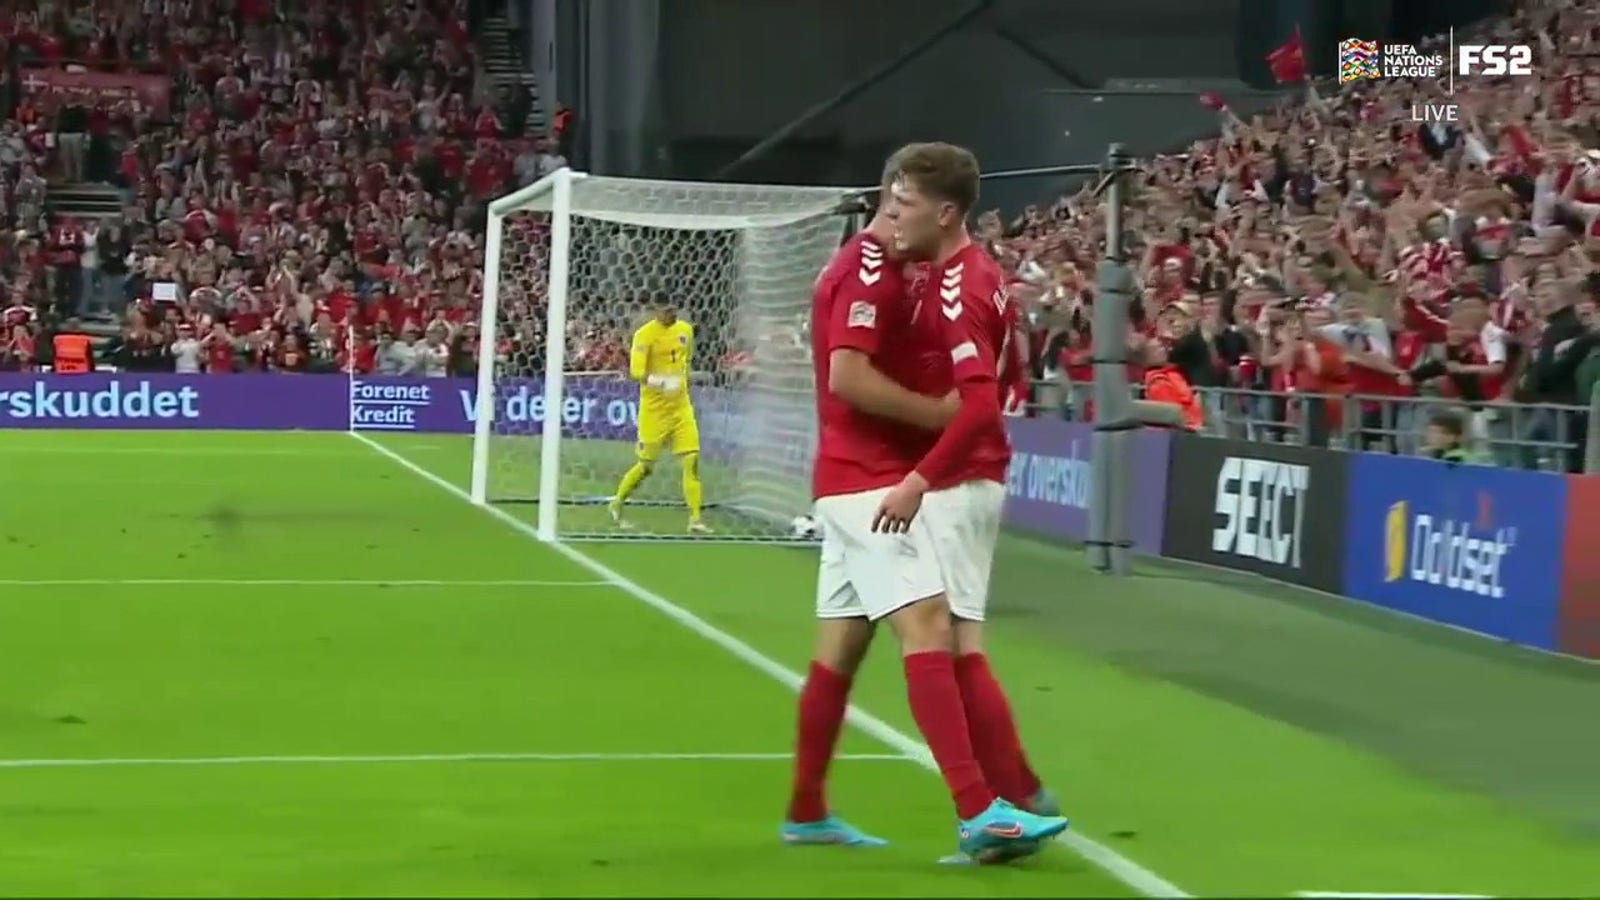 Jonas Wind scores and assists on a goal as Denmark takes a 2-0 lead